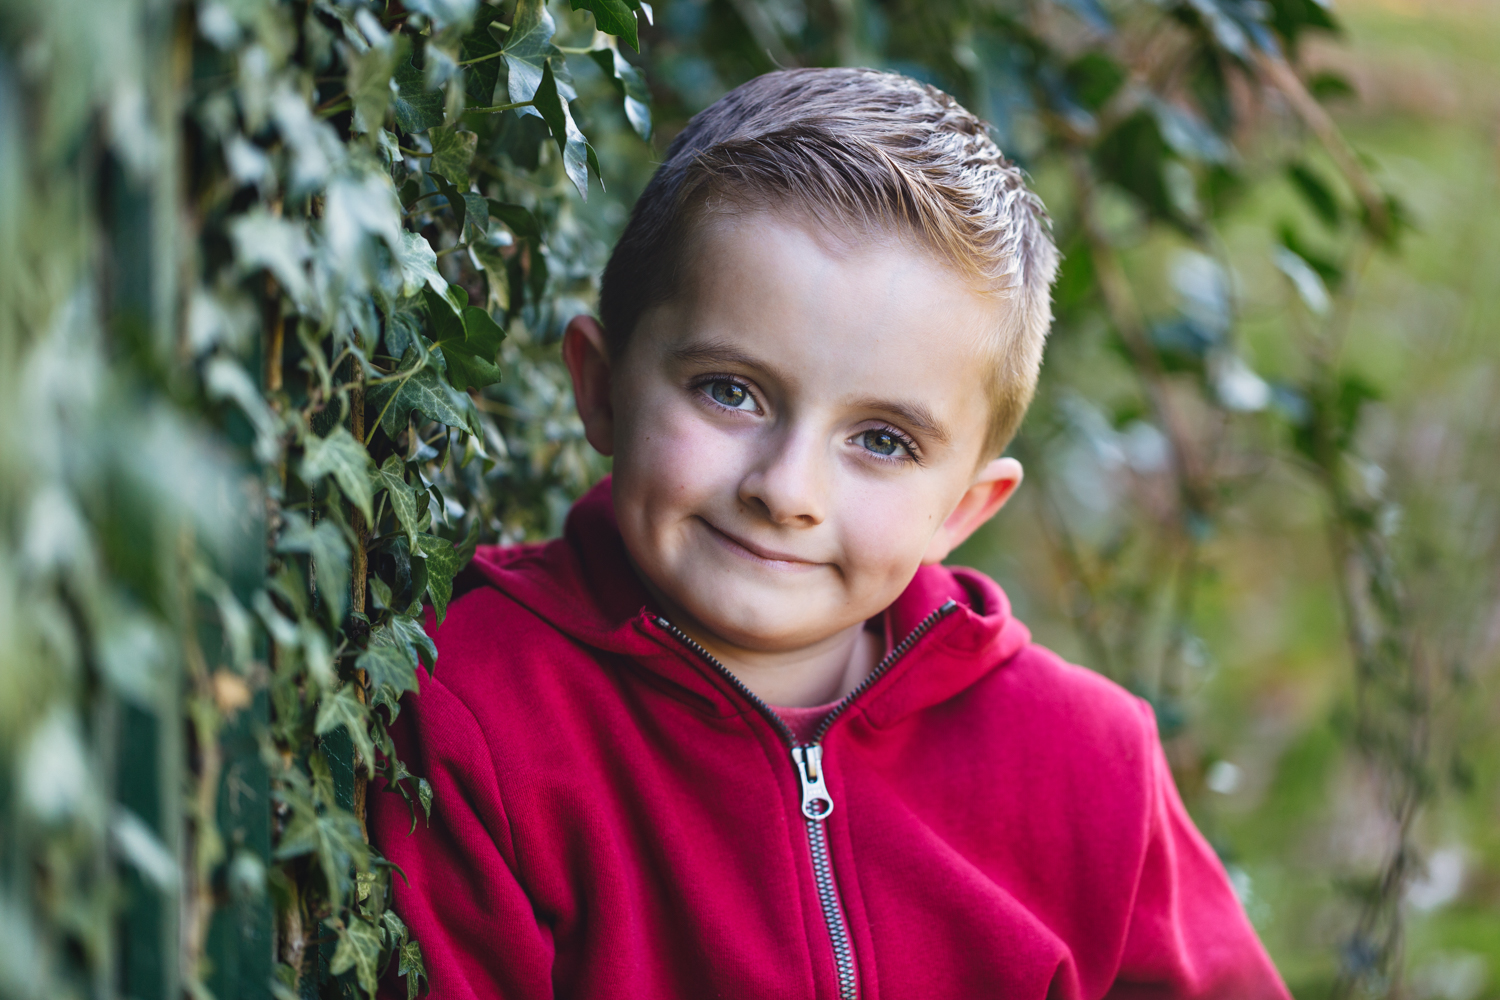 Family and Children's portrait photographer South Wales, Caerphilly, Cardiff, Newport